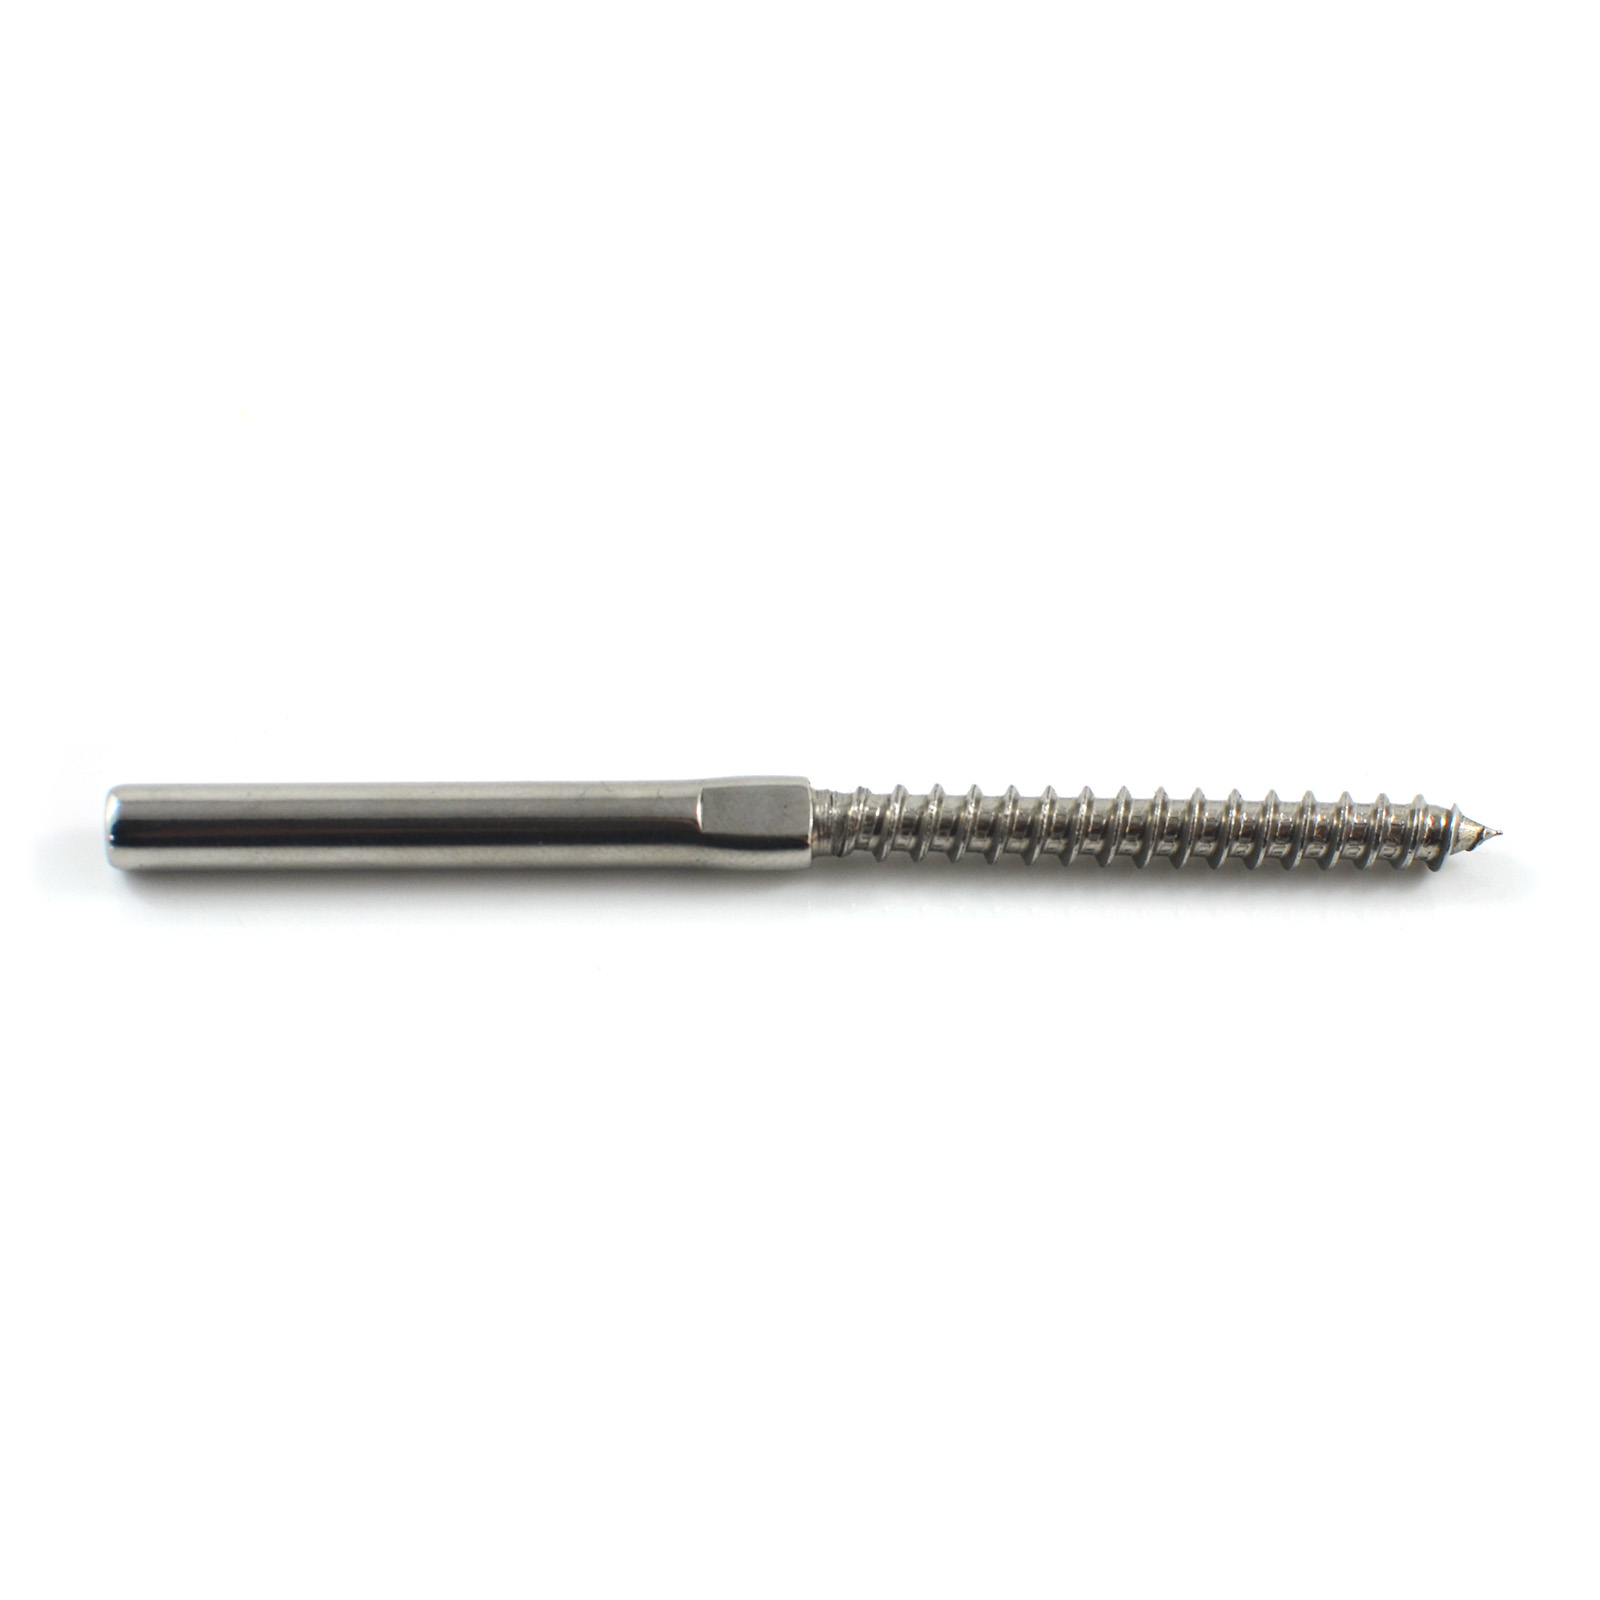 Lag Screw Swage Terminal M8 x 54mm LHT for 4.0mm Wire AISI 316